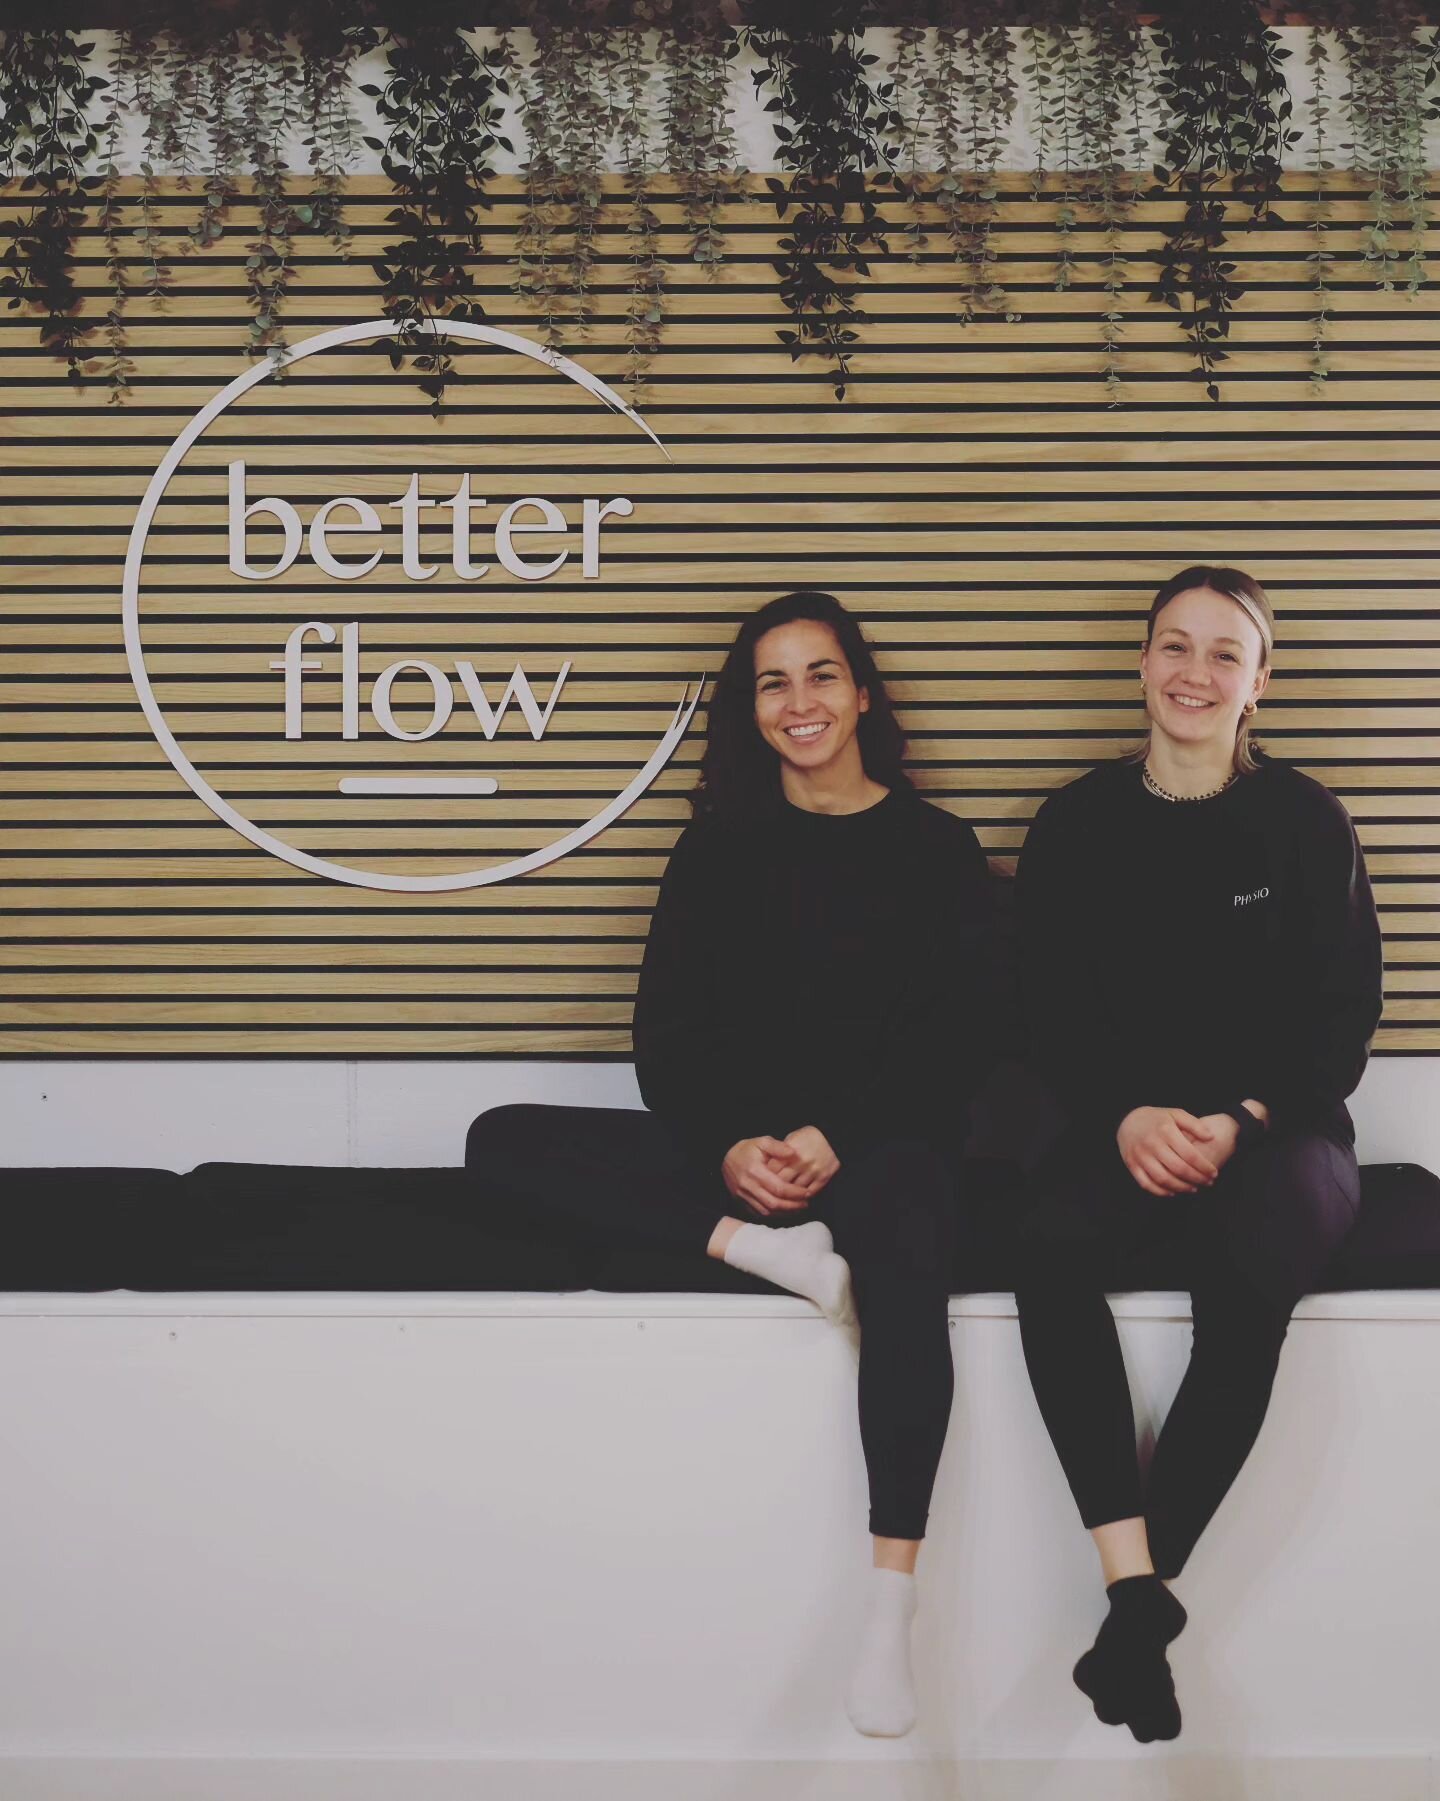 6 months at Better Flow studio 💙
Thanks everyone for all the support and trust in our work! 

Love x

@joanapiresphysio 
@clarakervyn